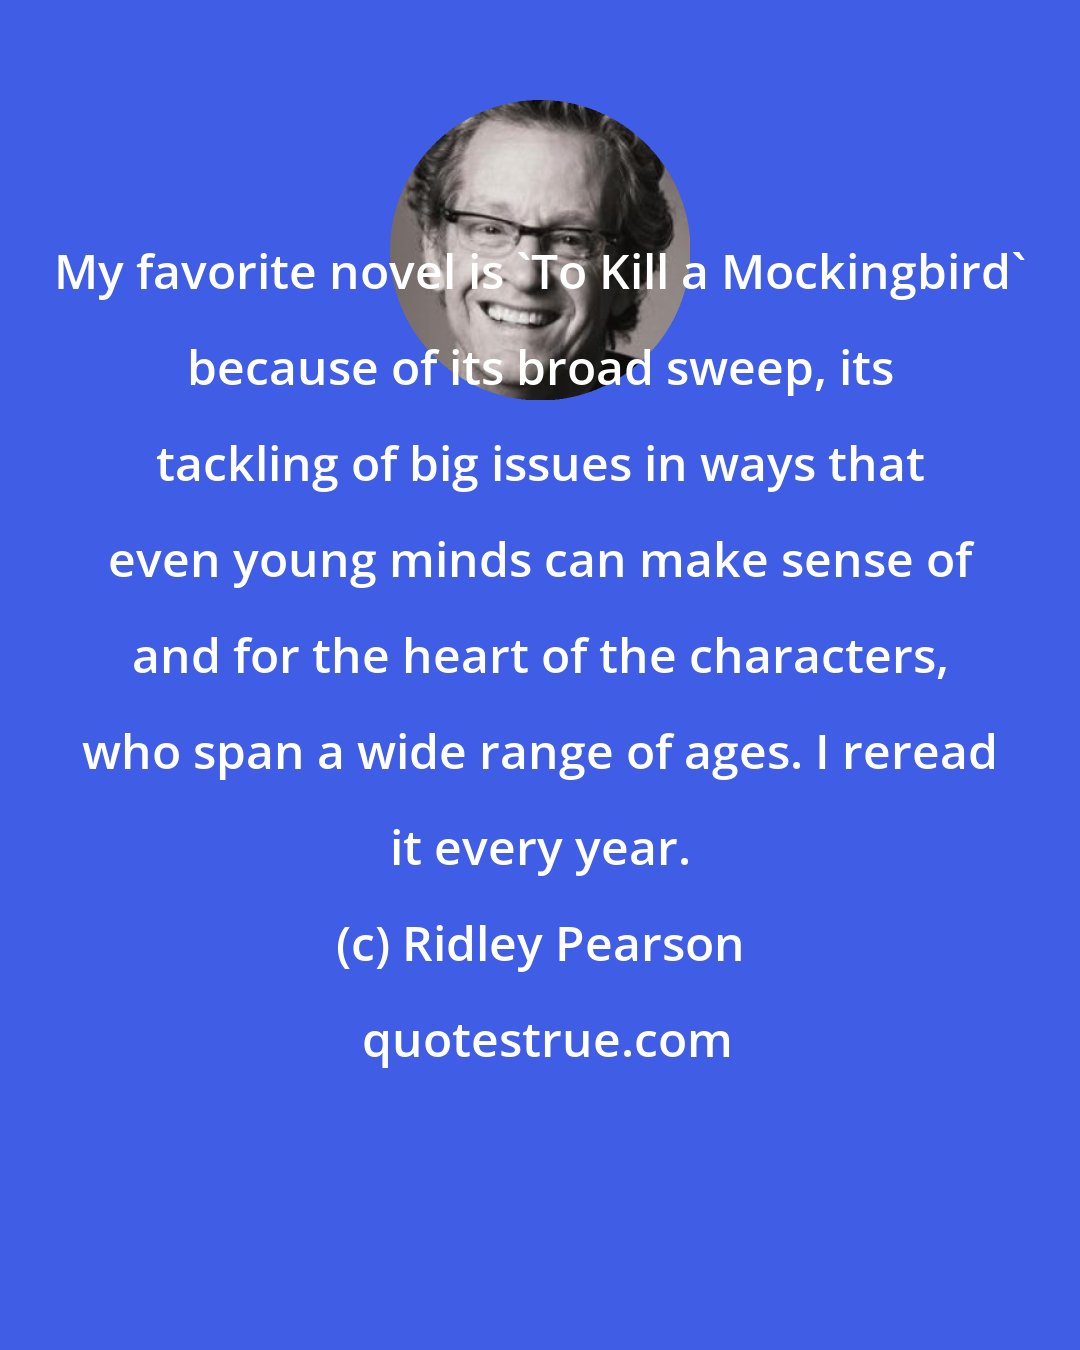 Ridley Pearson: My favorite novel is 'To Kill a Mockingbird' because of its broad sweep, its tackling of big issues in ways that even young minds can make sense of and for the heart of the characters, who span a wide range of ages. I reread it every year.